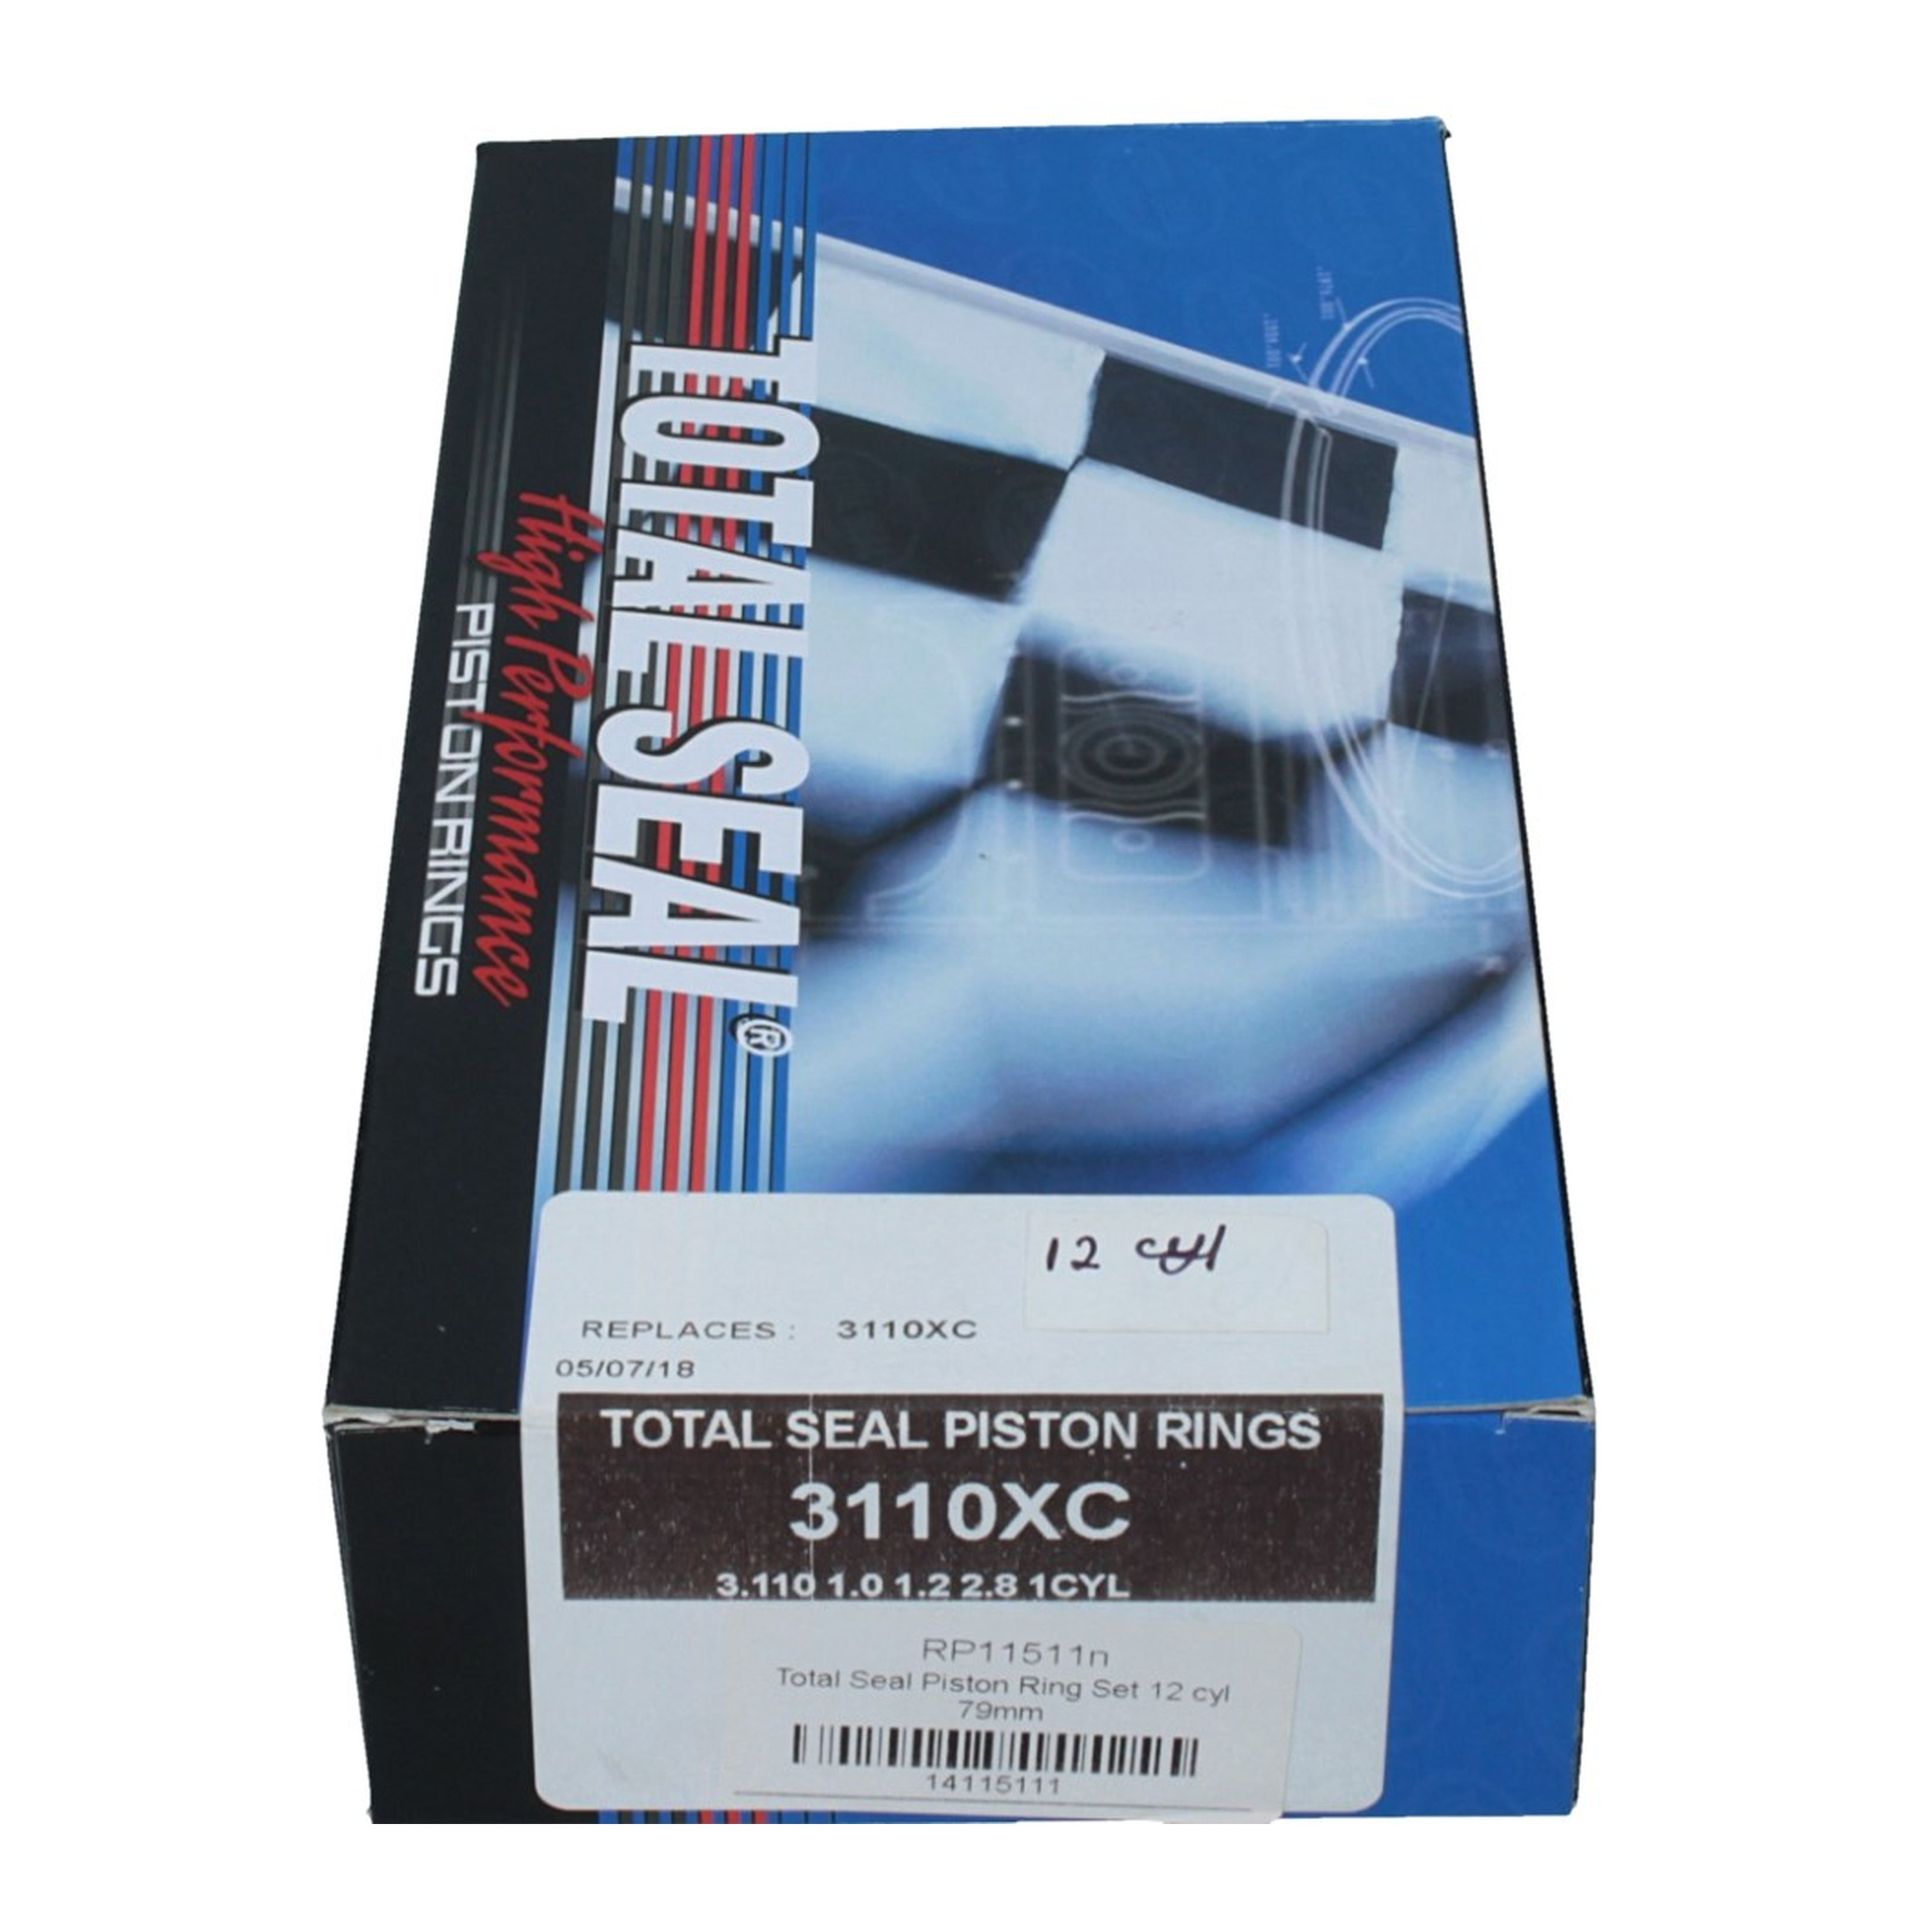 Total Seal Piston Ring Set 12 Cyl 79mm